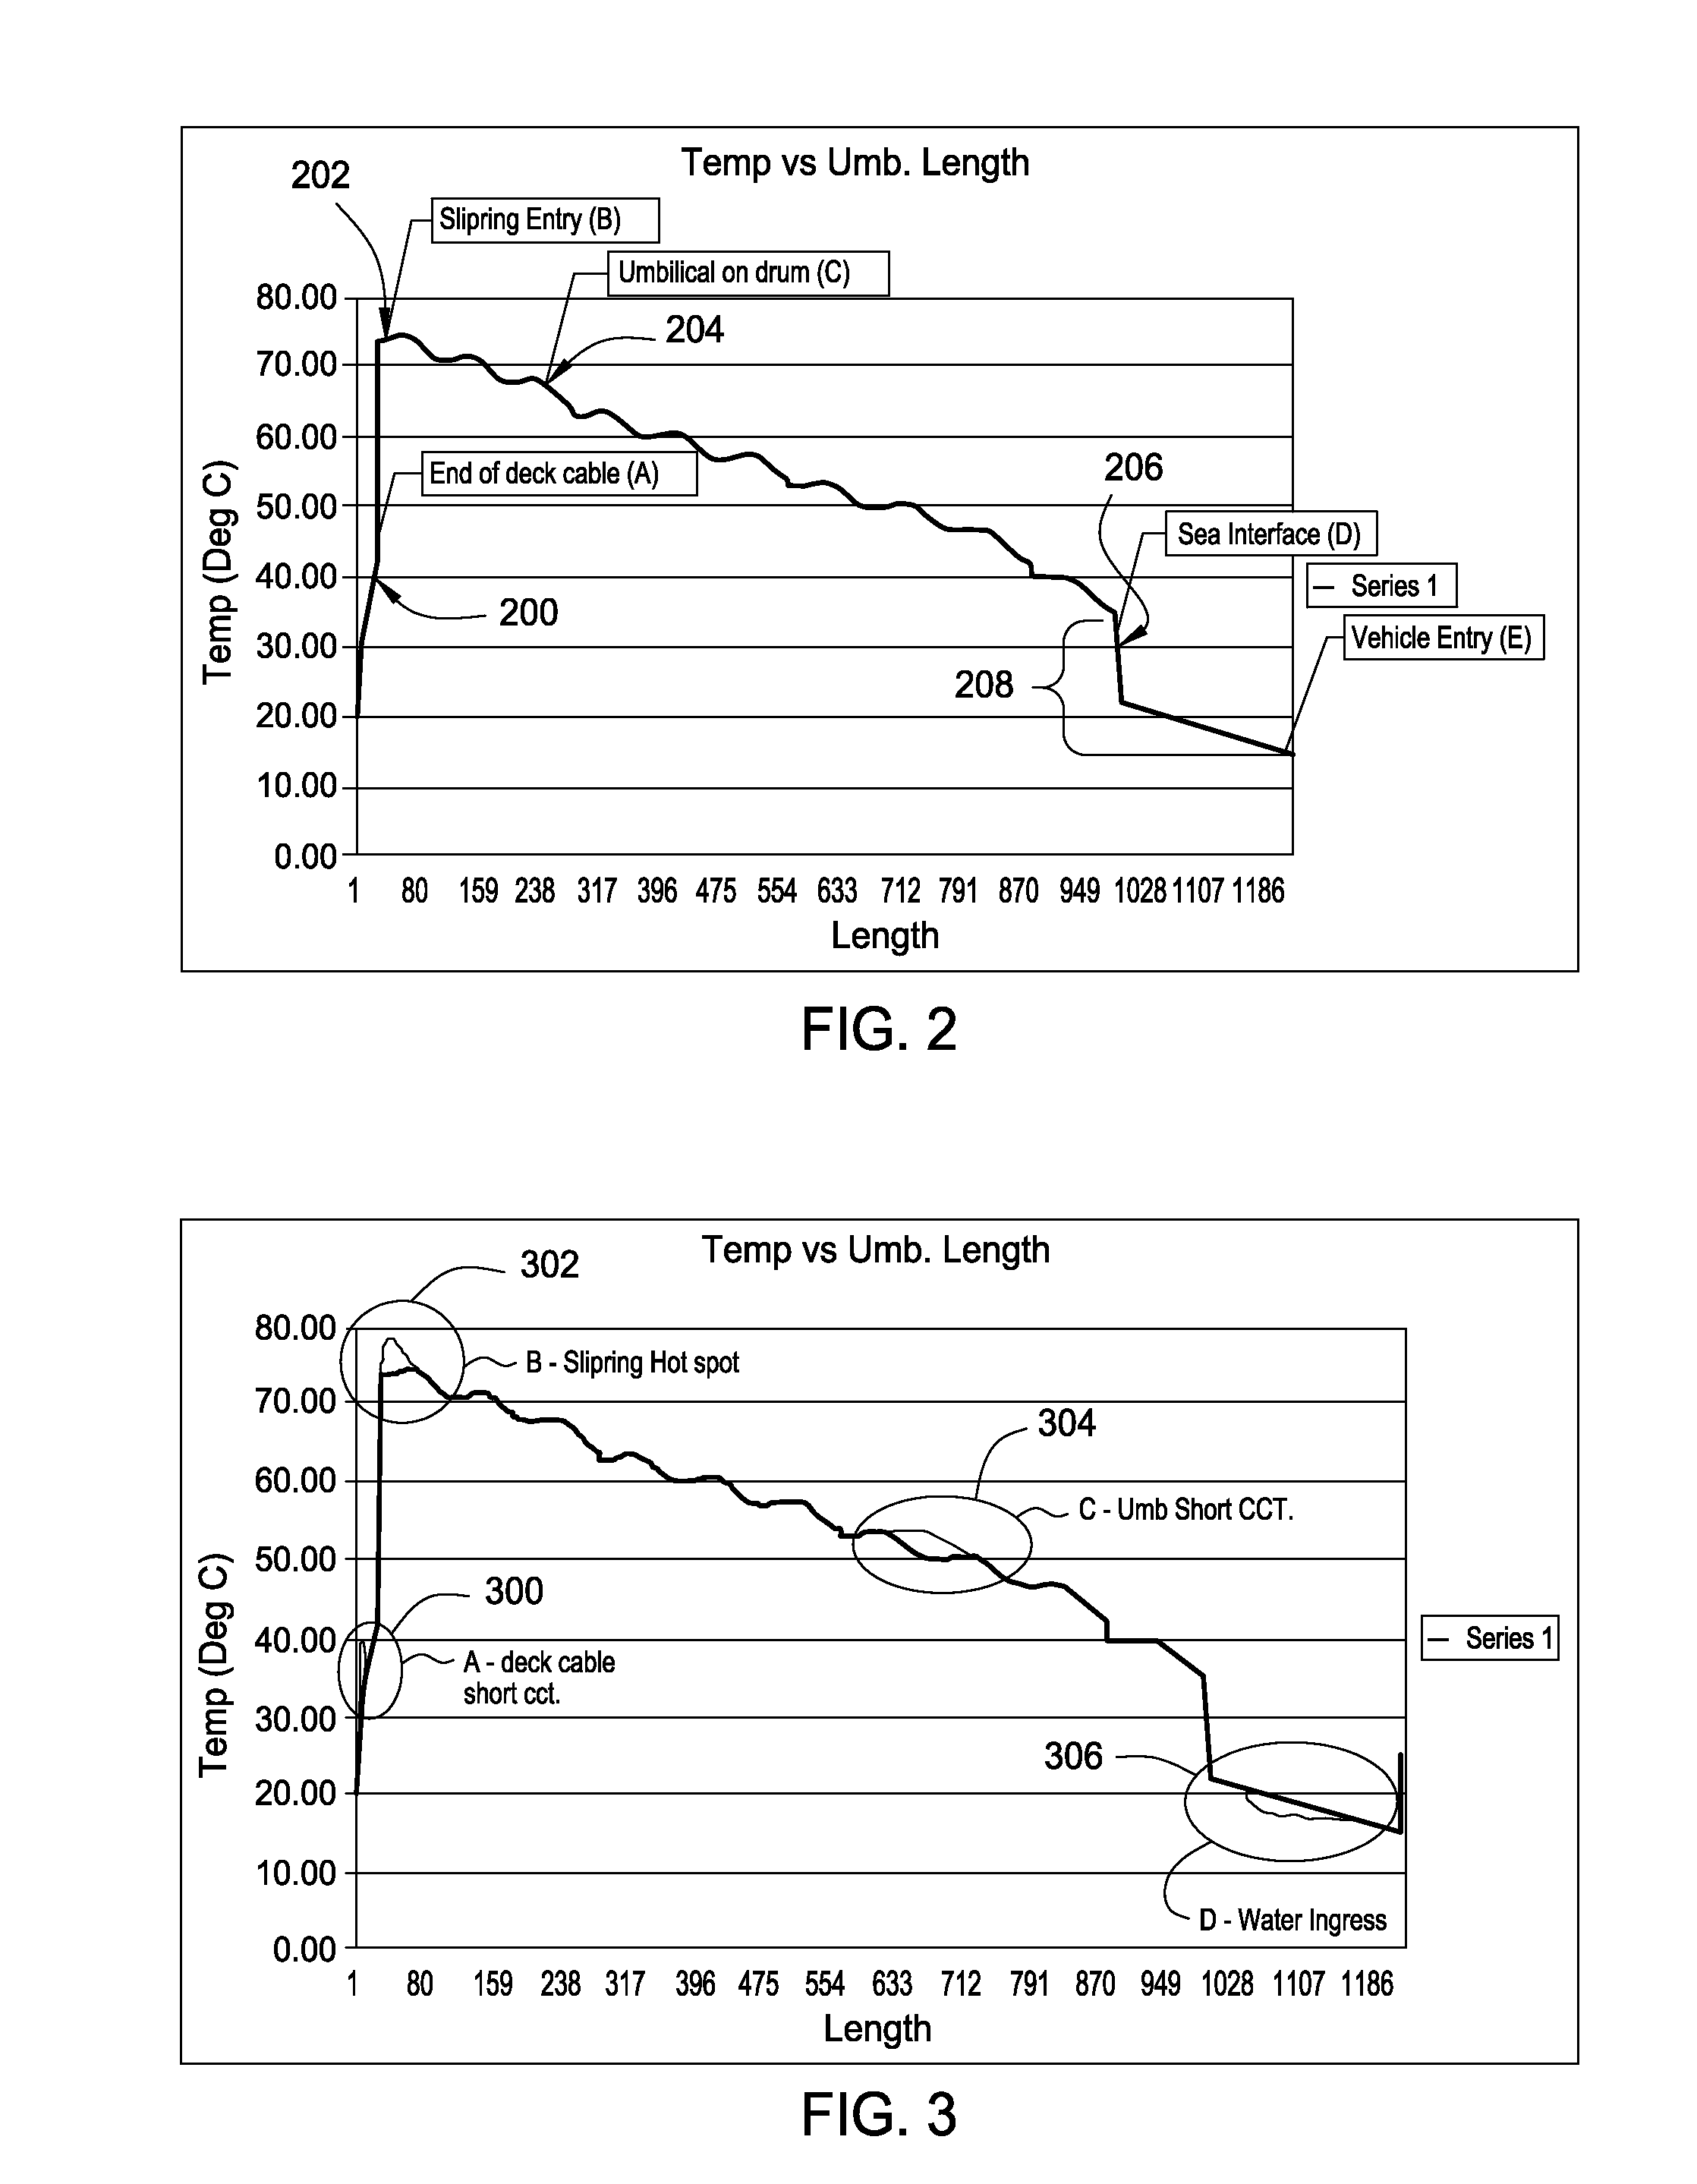 Distributed temperature sensing in a remotely operated vehicle umbilical fiber optic cable